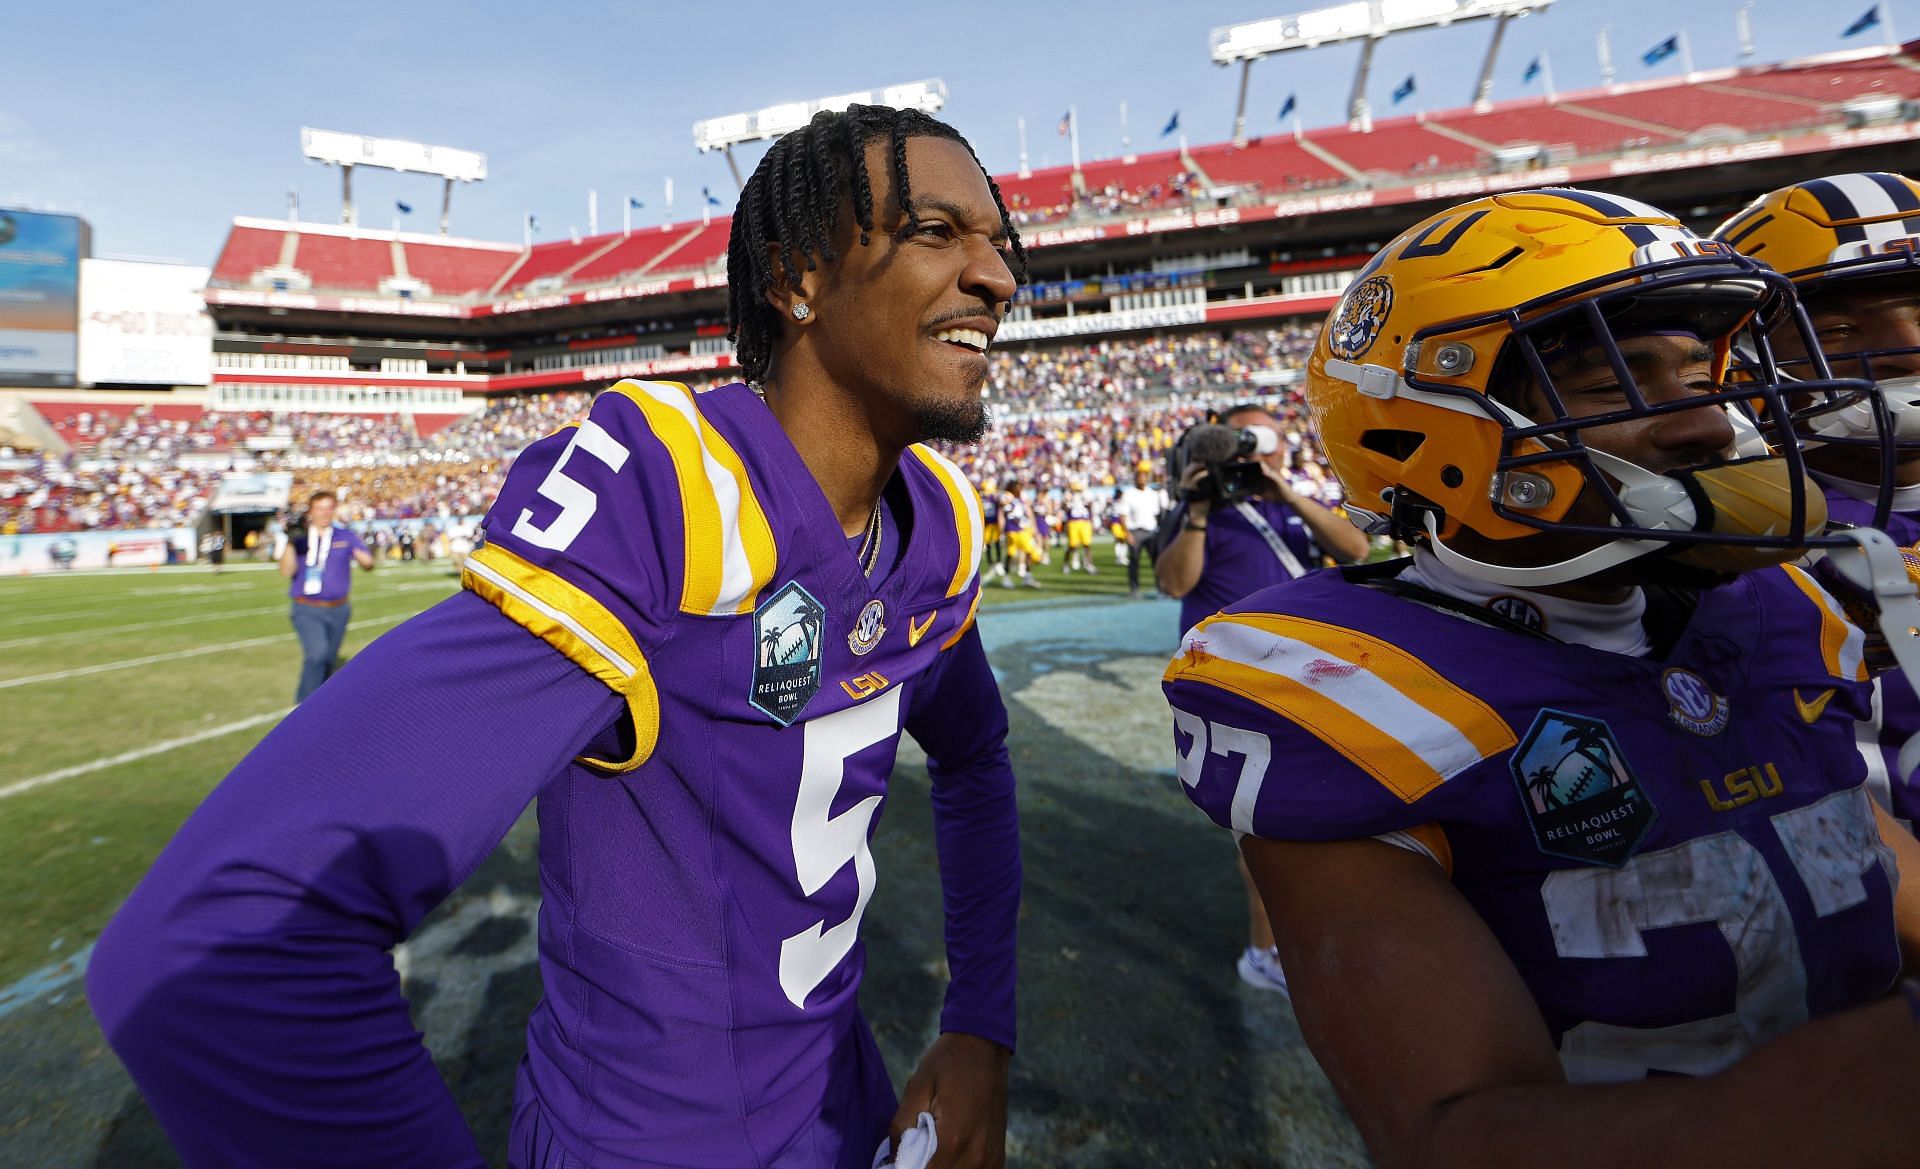 ReliaQuest Bowl - Wisconsin v LSU: TAMPA, FLORIDA - JANUARY 01: Jayden Daniels #5 of the LSU Tigers celebrates after winning the ReliaQuest Bowl against the Wisconsin Badgers at Raymond James Stadium on January 01, 2024 in Tampa, Florida. (Photo by Mike Ehrmann/Getty Images)